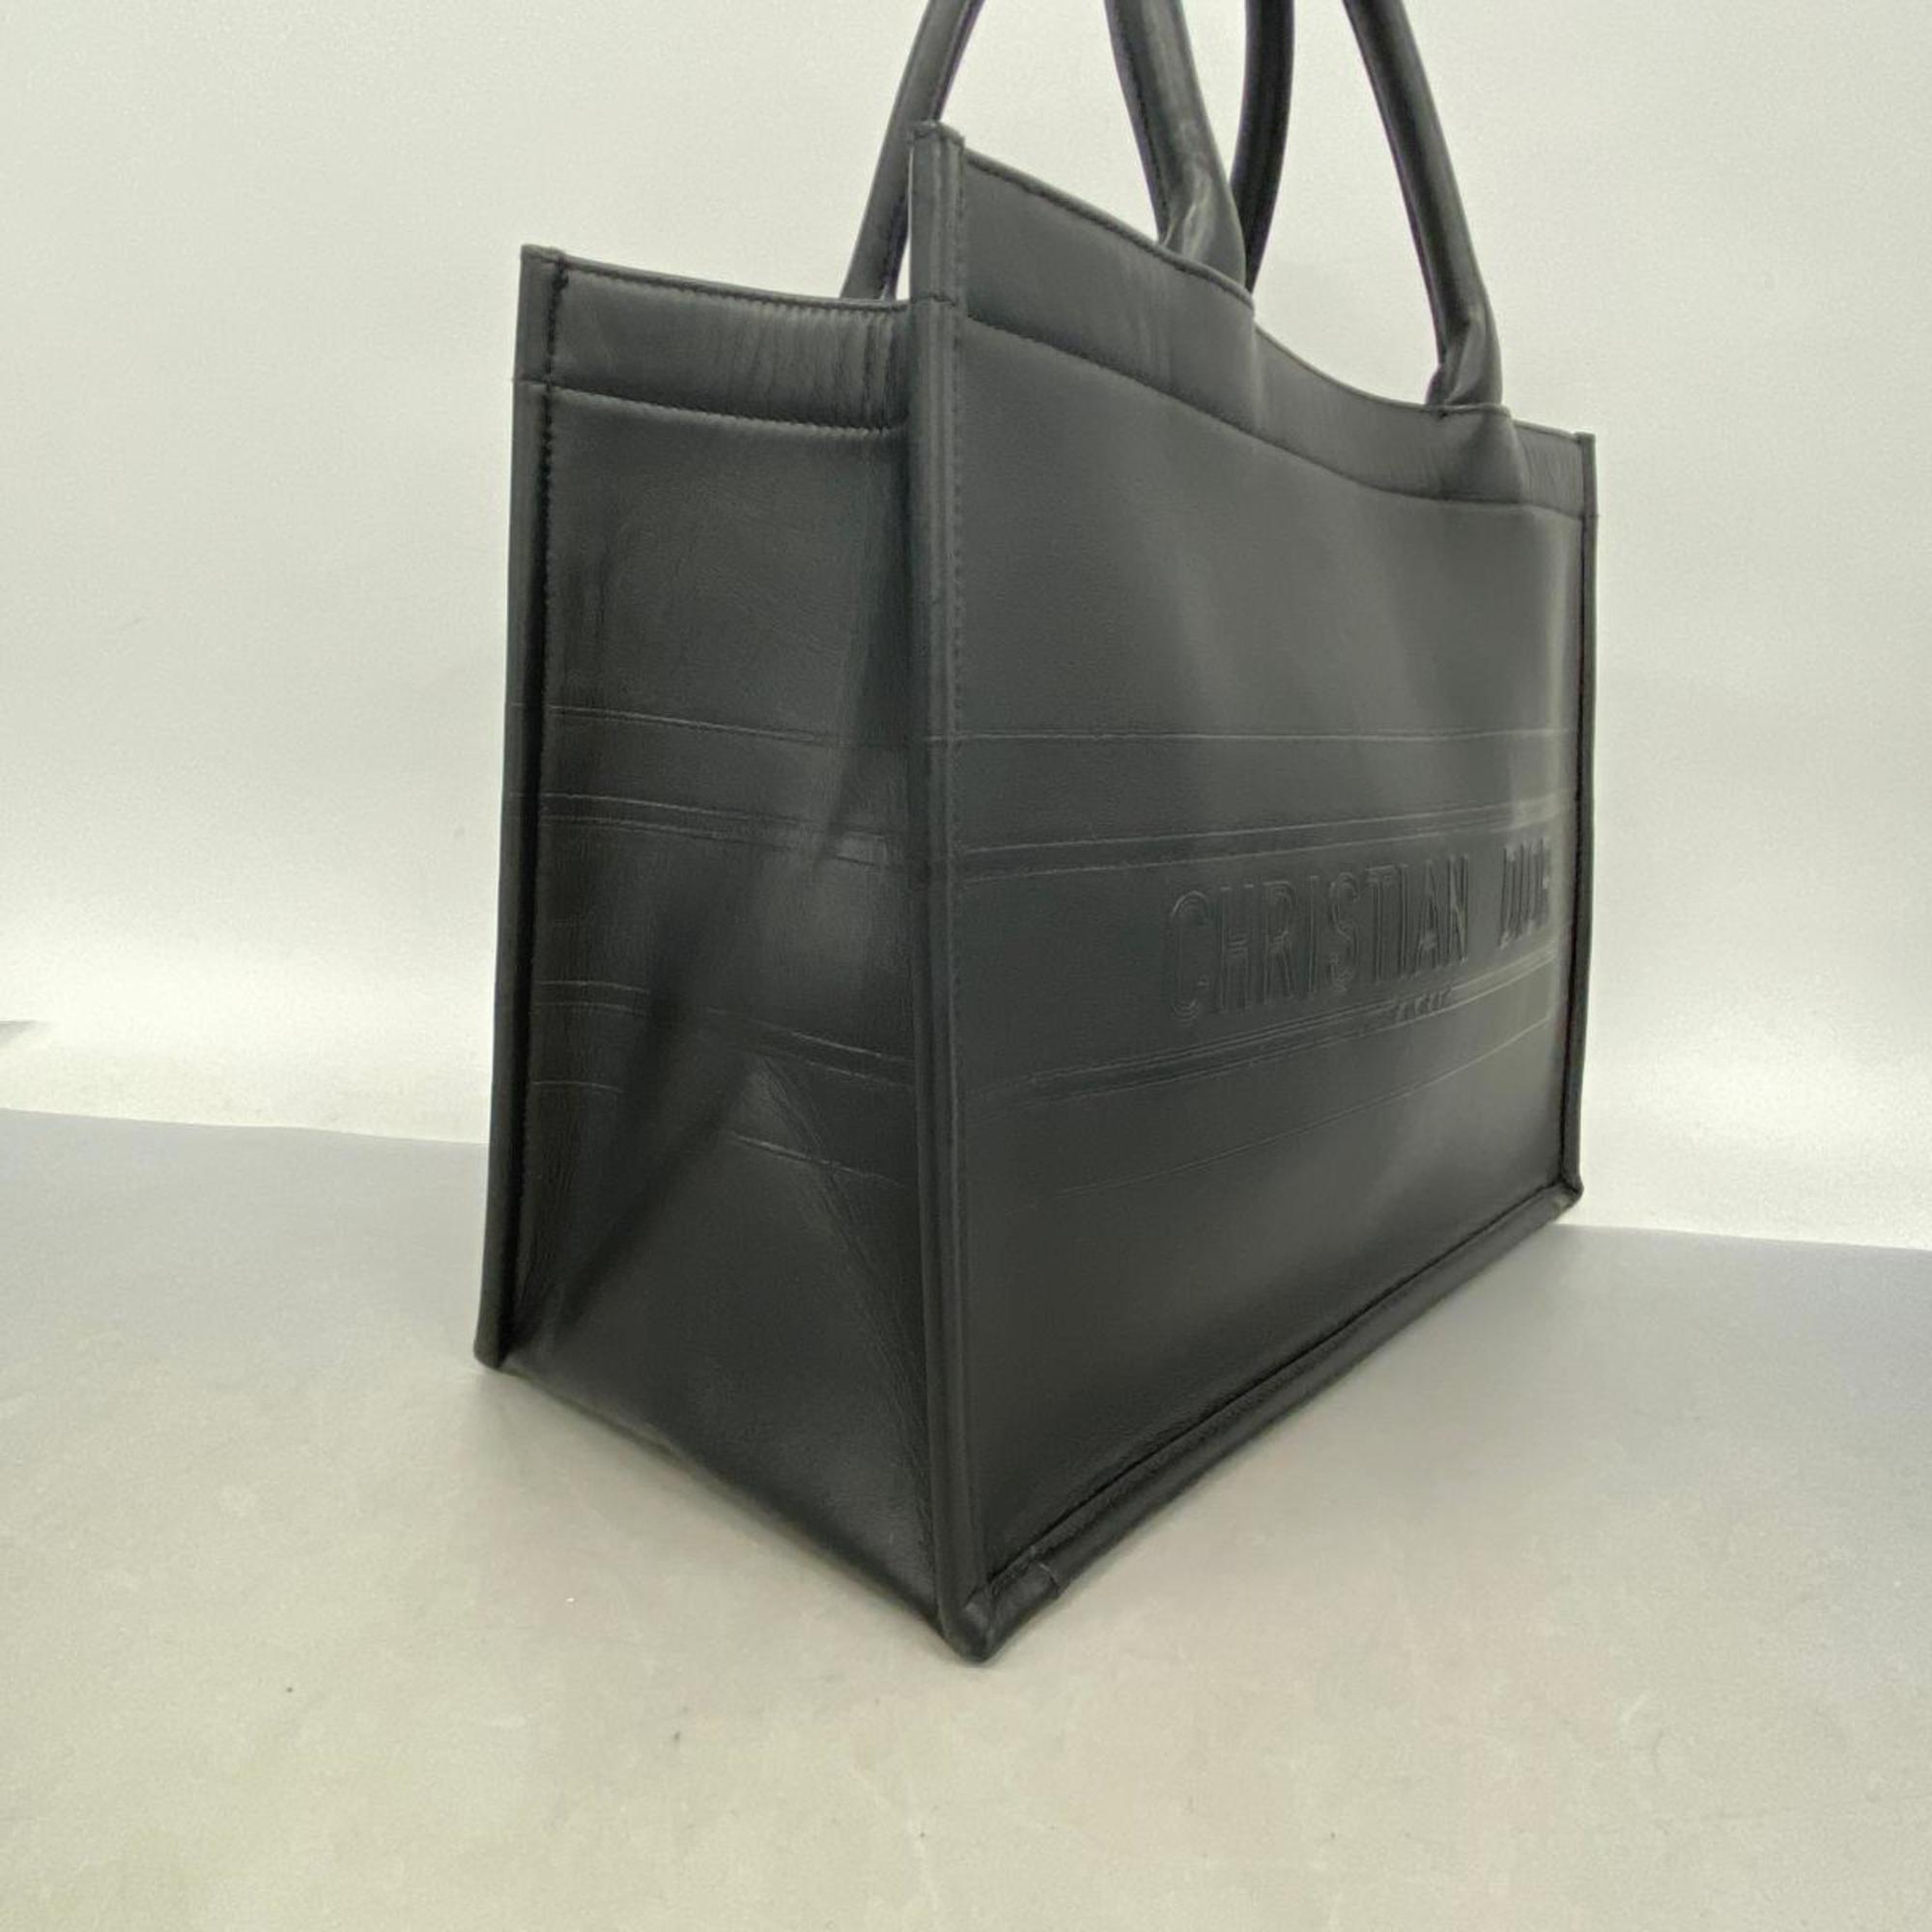 Christian Dior Tote Bag Book Leather Black Women's